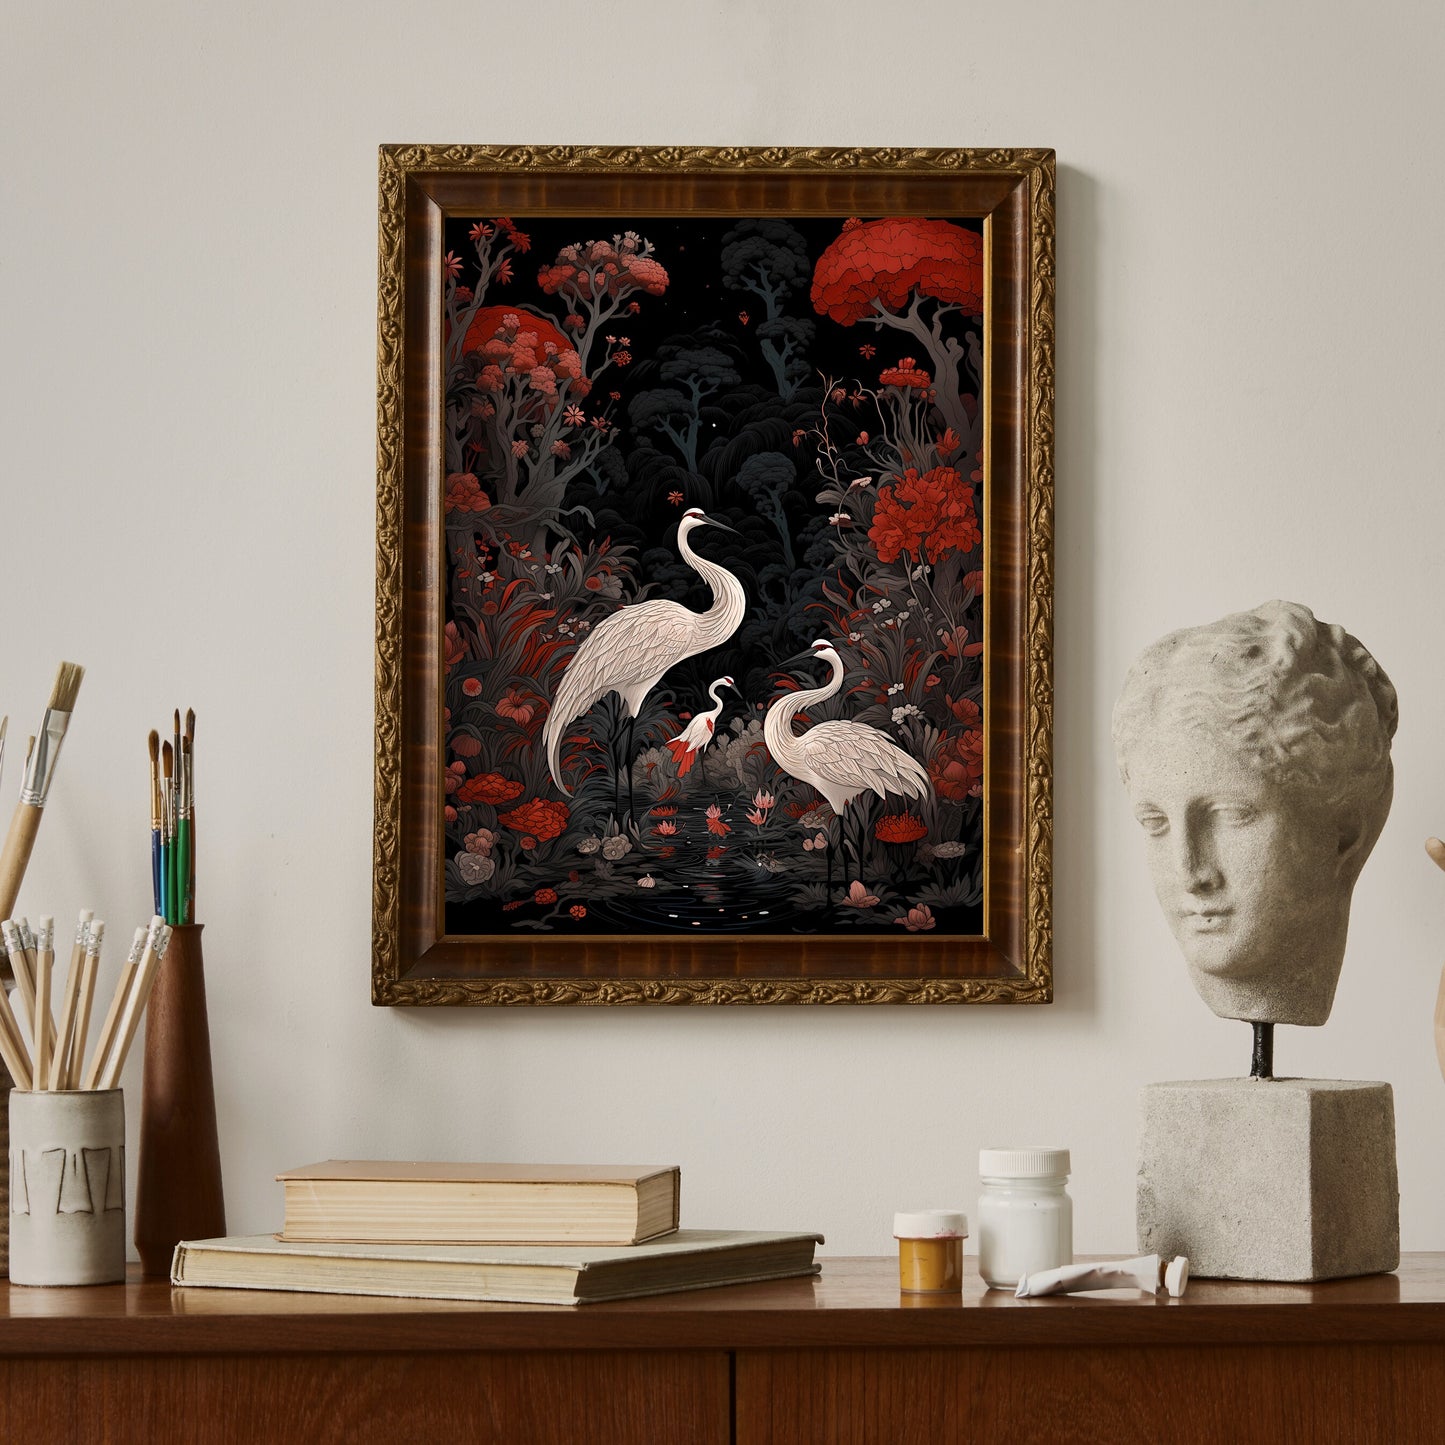 Japanese Crane Art Vintage Japanese Paper Poster Prints Wall Art Oriental Bird Artwork Japandi Style Decor Above Couch Decor Black and Red Painting